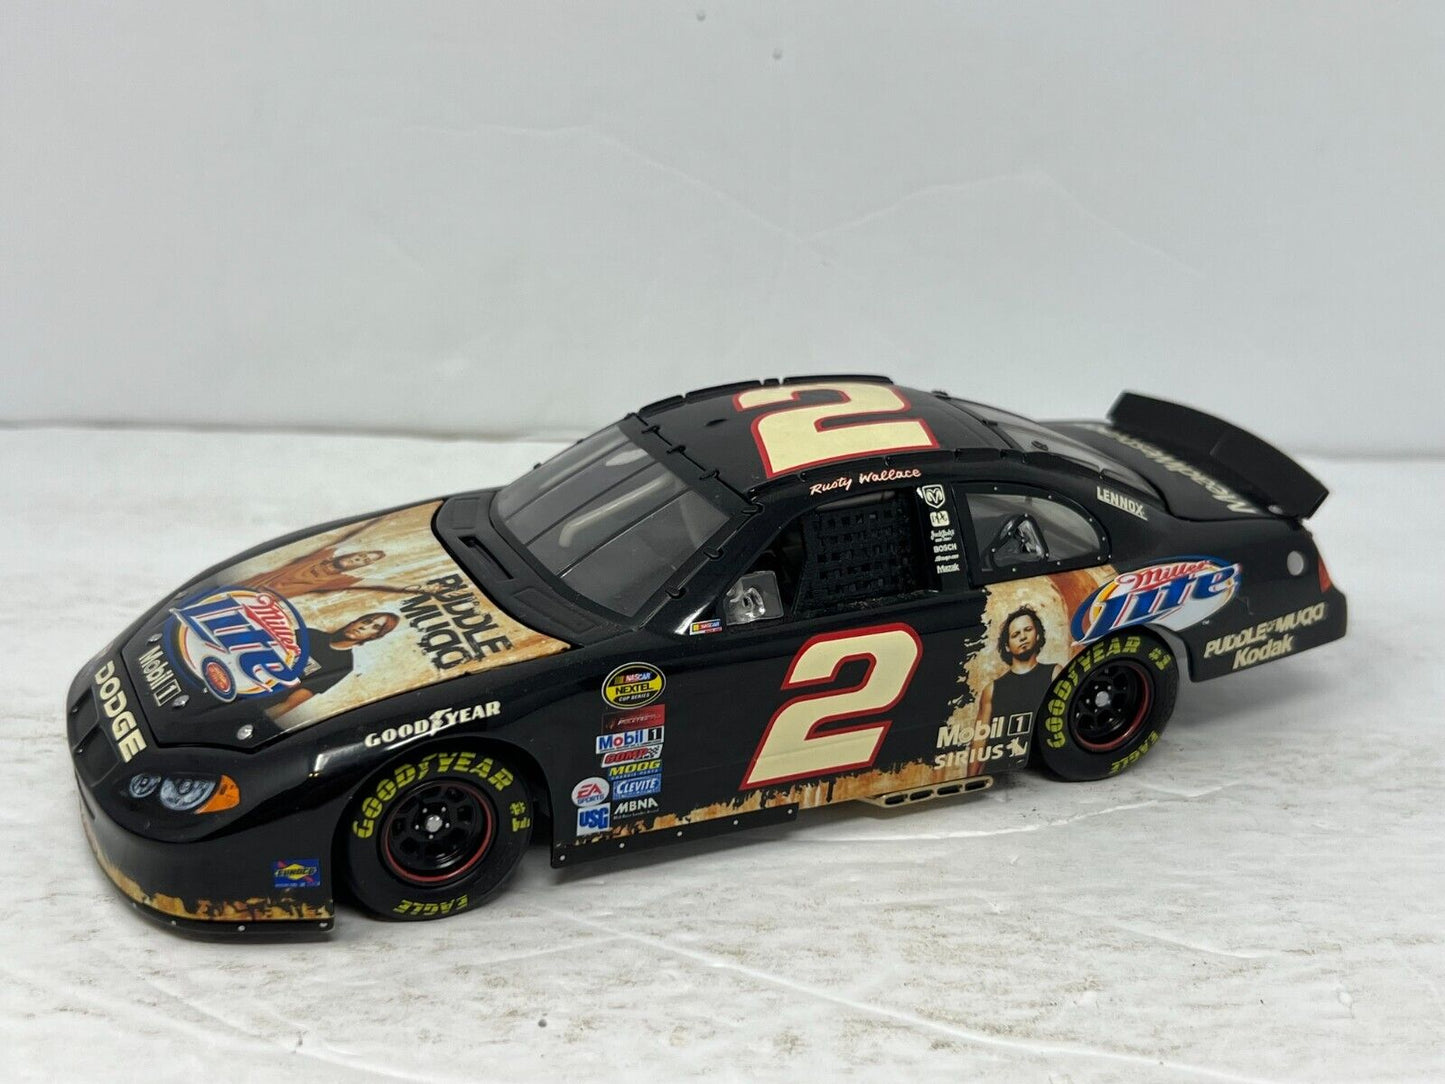 Action Nascar #2 Rusty Wallace Miller Puddle of Mudd 2004 Intrepid 1:24 Diecast